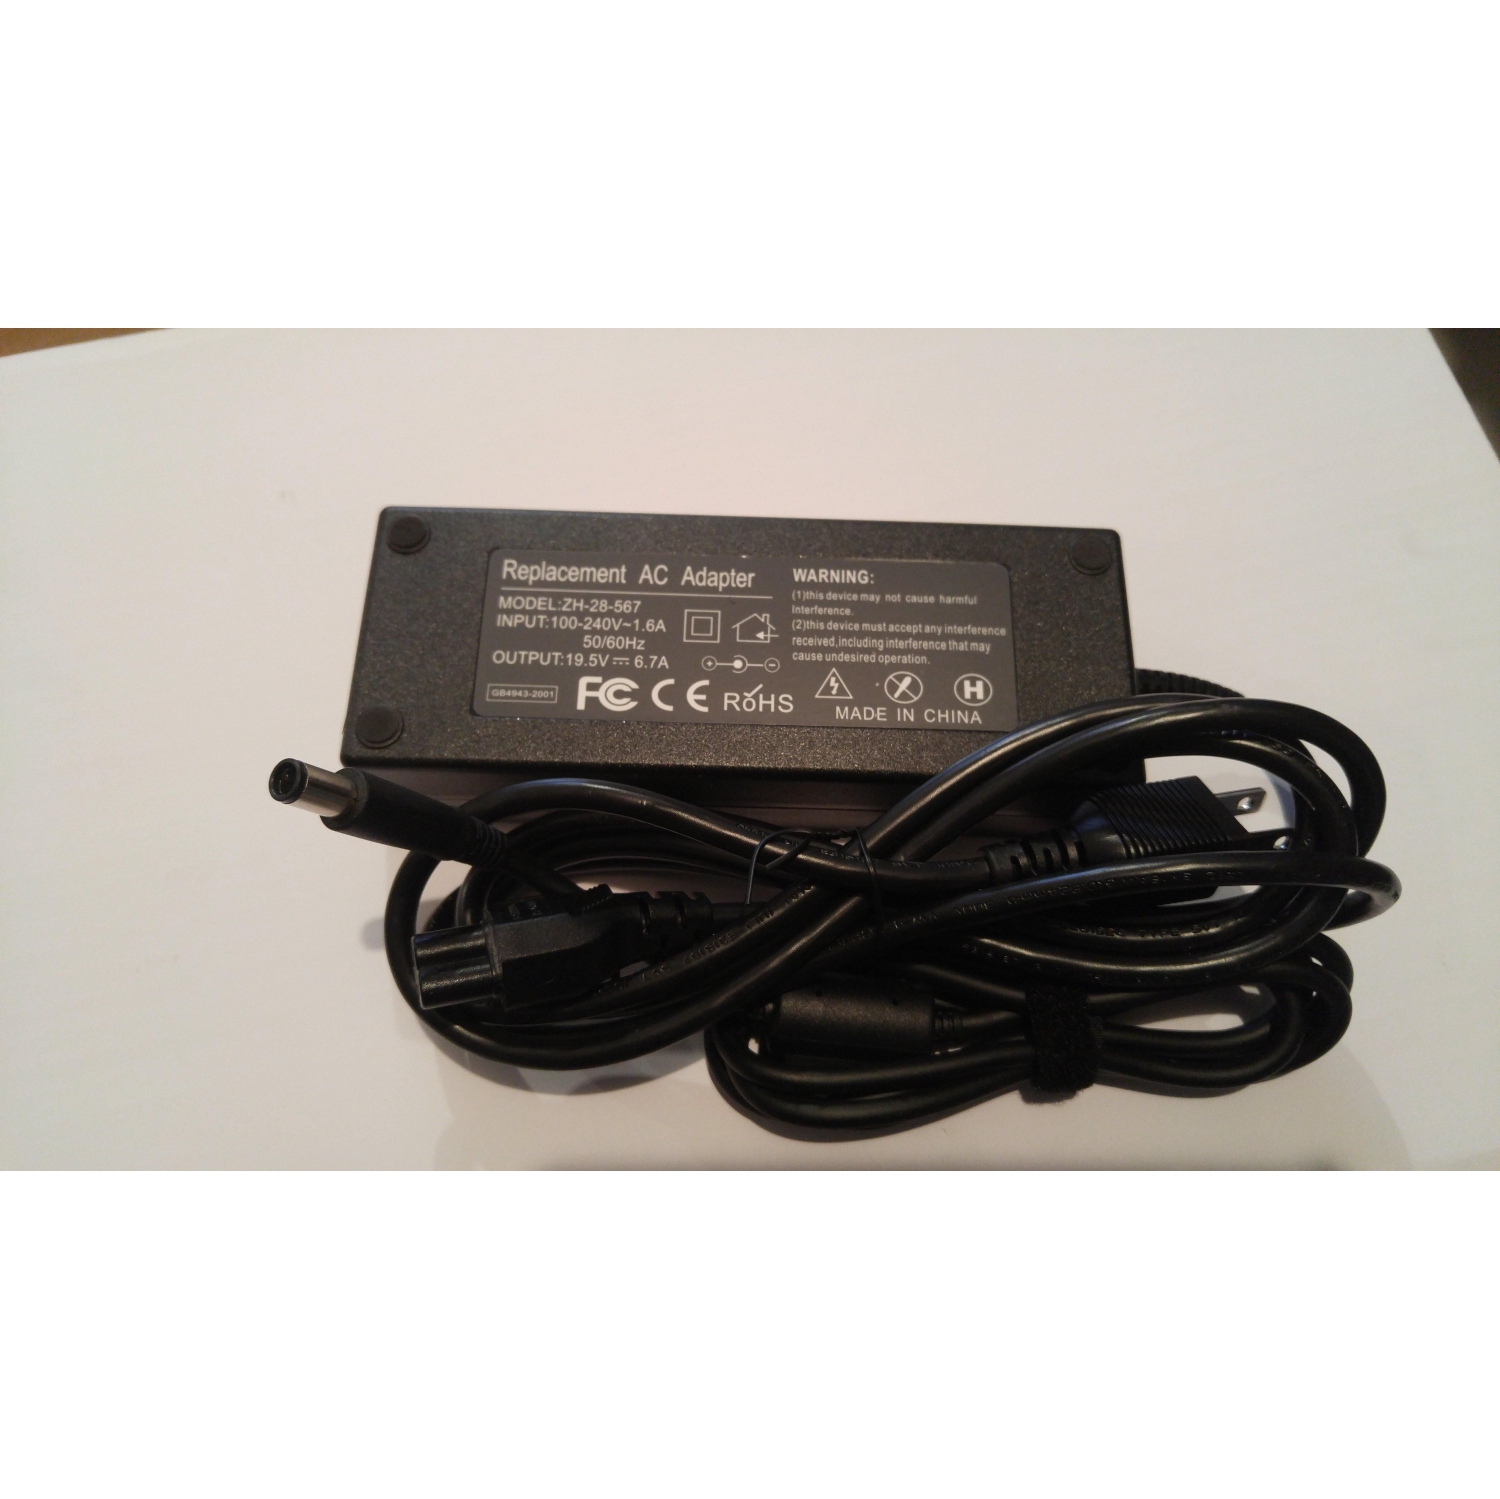 New Compatible Dell XPS M1210 M170 M1710 GEN 2 Laptop AC Adapter Charger & Power Cord 130W